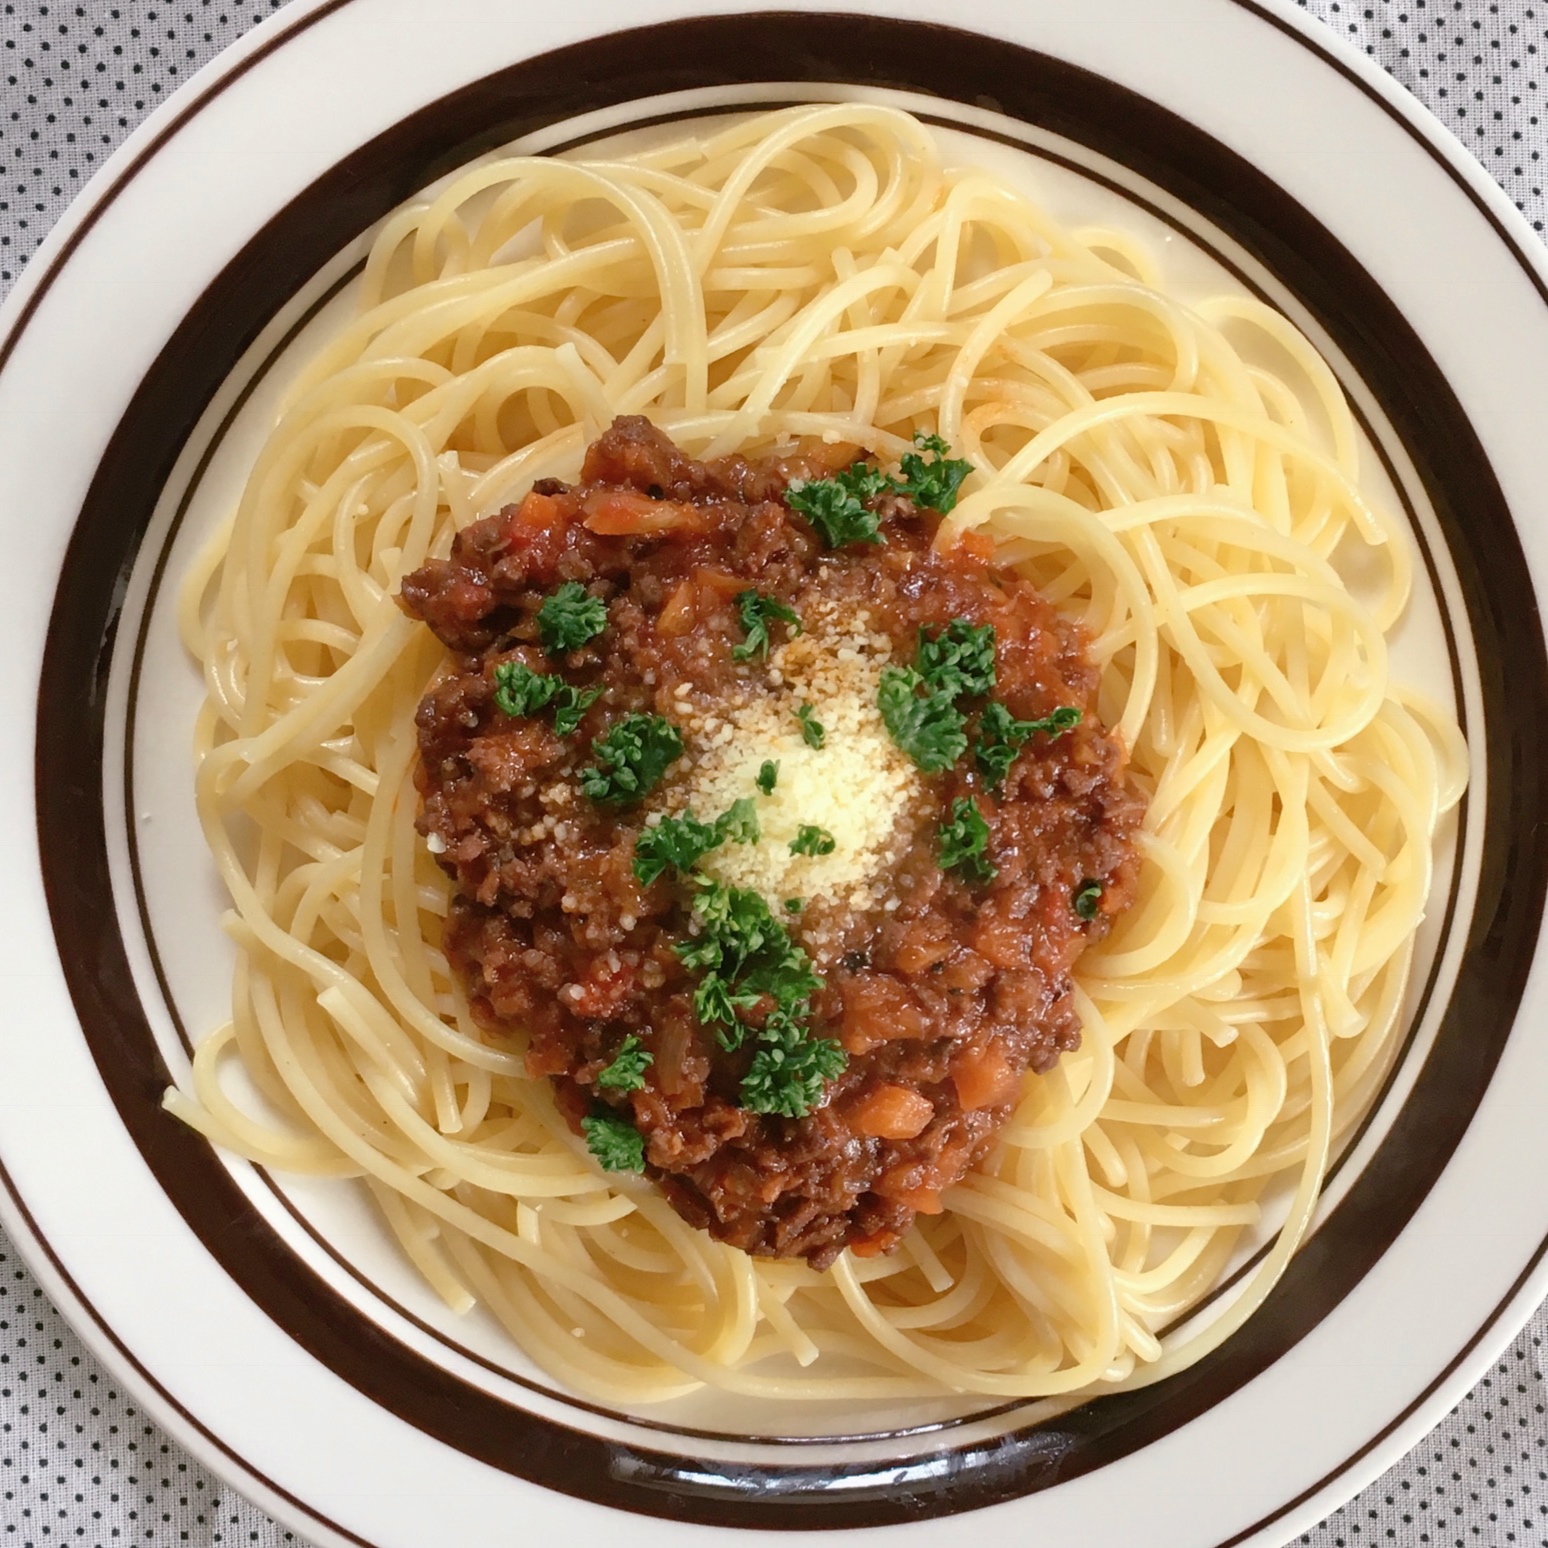 A dish of spaghetti topped with plenty of flavorful meat sauce.